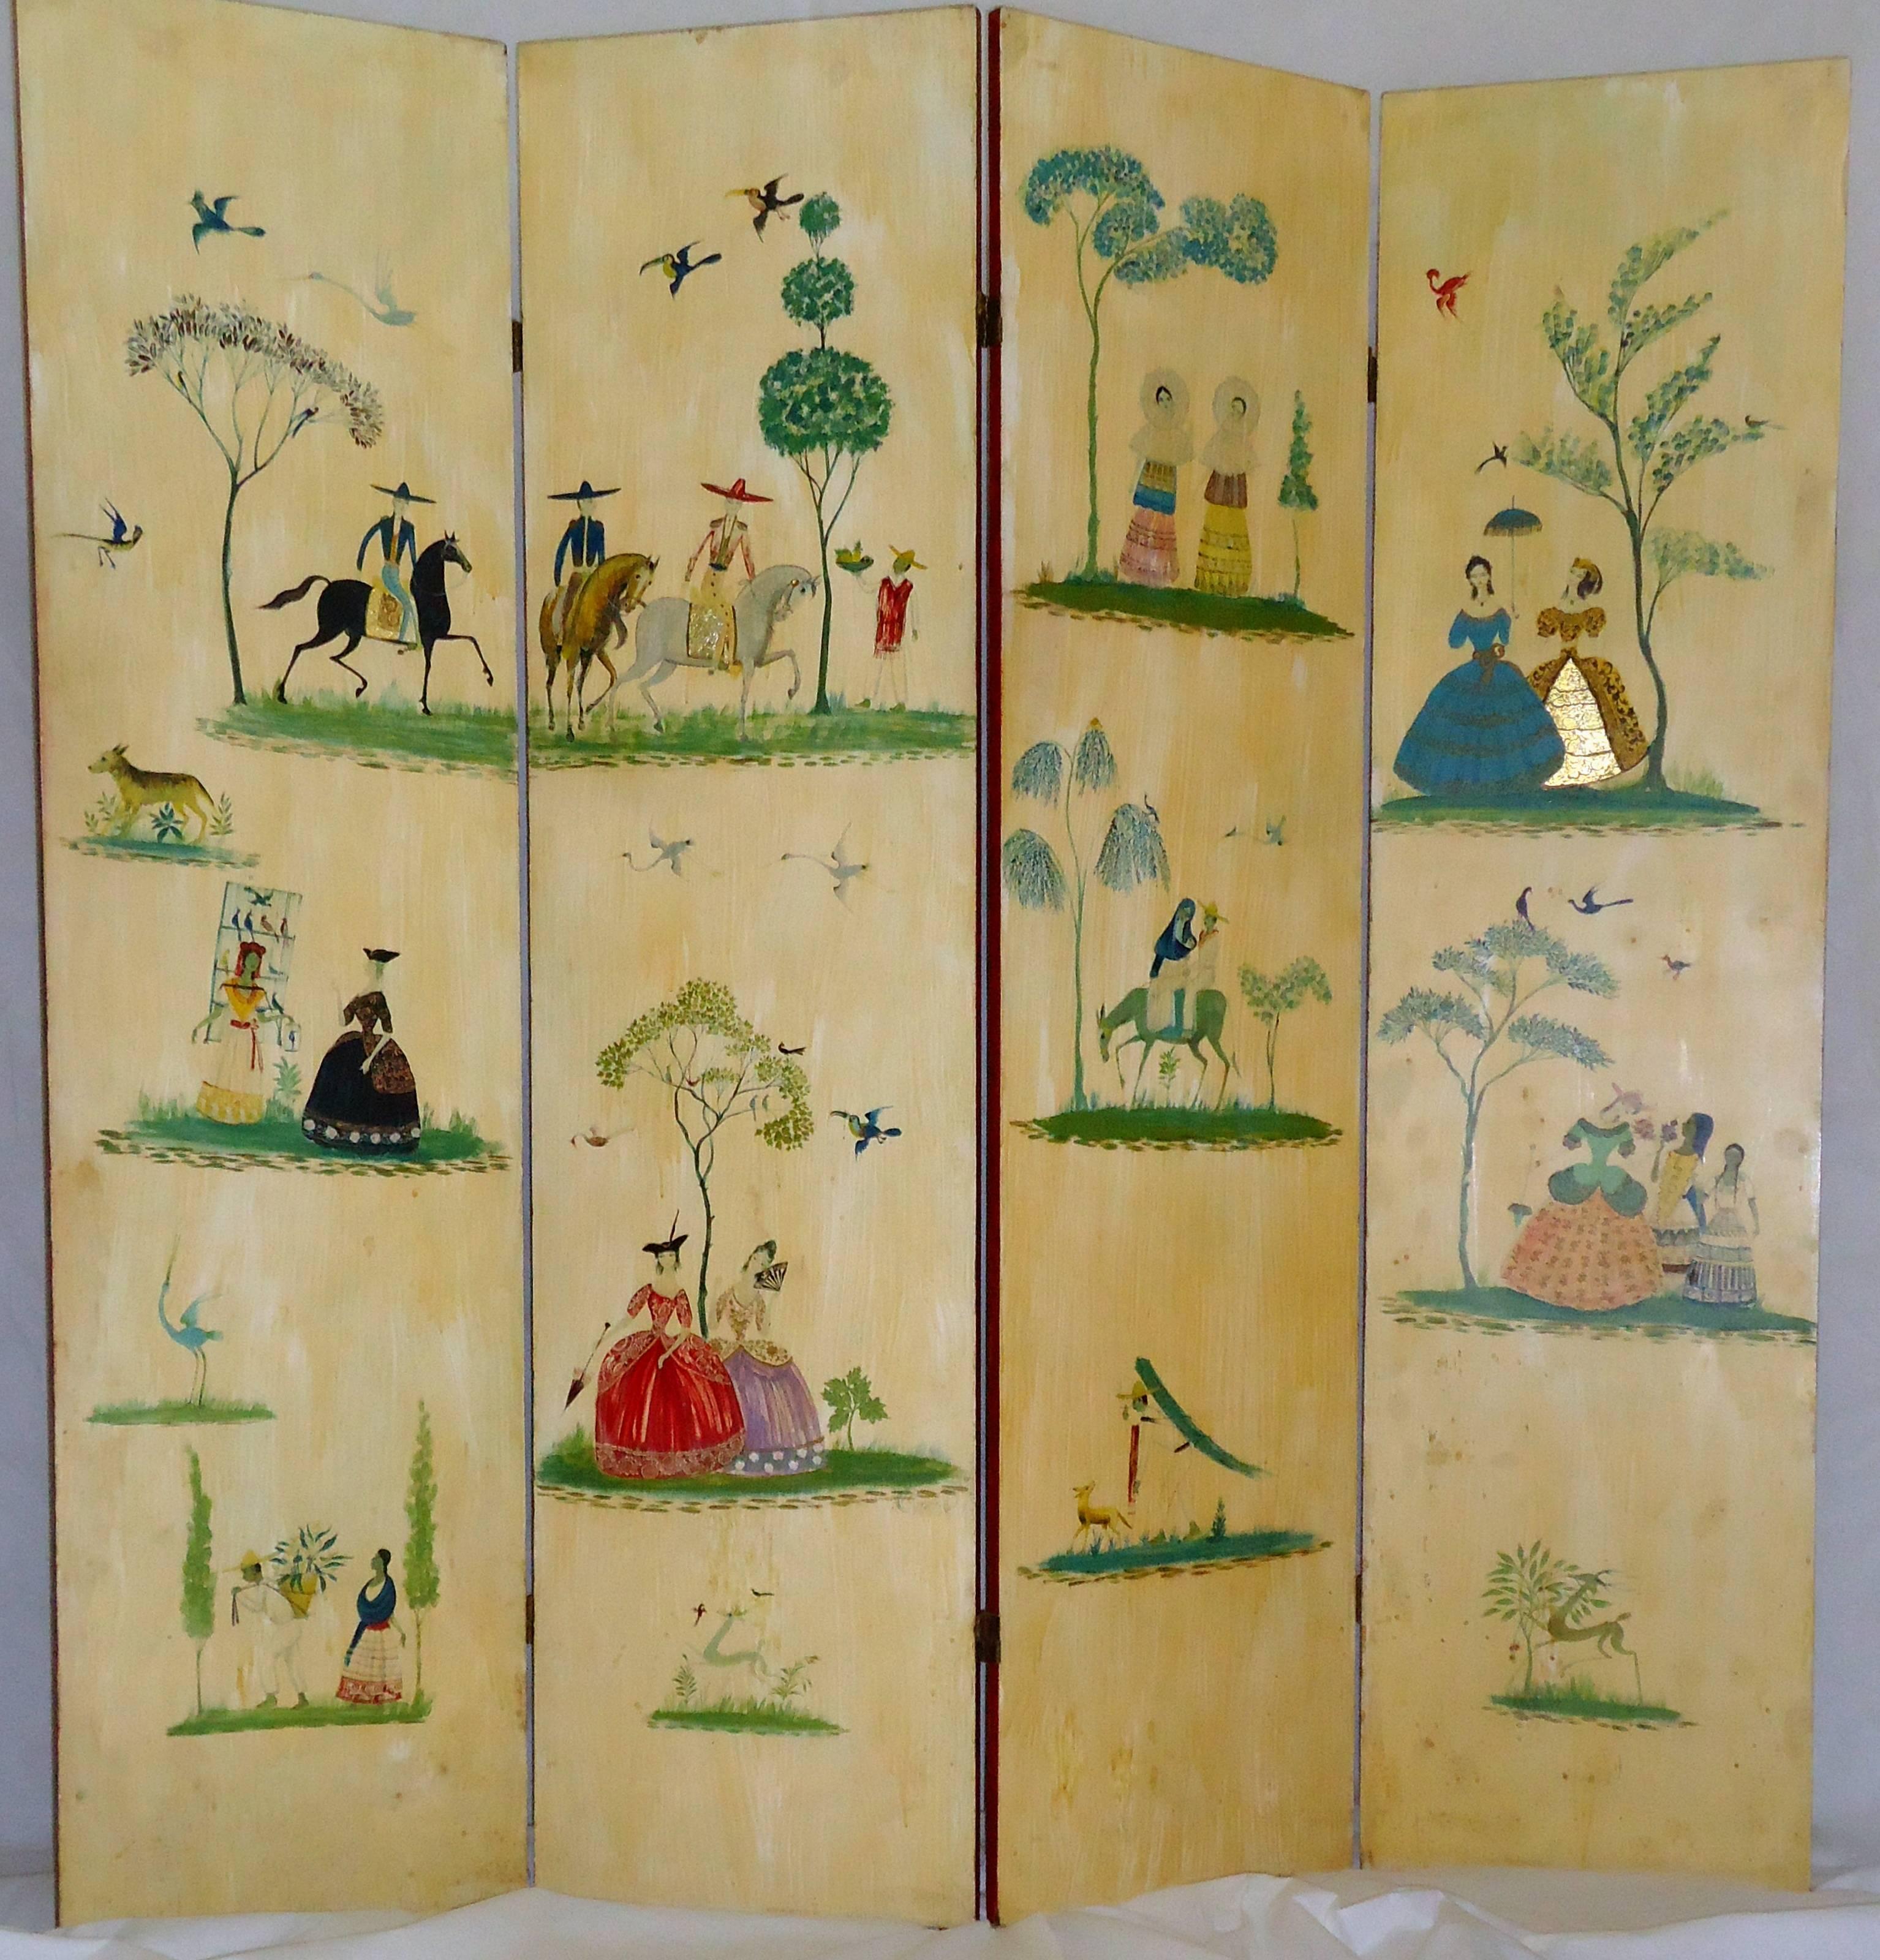 Salvador Corona painted four-panel wooden floor screen created in his studio in Mexico circa 1938.

This rare hand crafted multi medium room divider was the property of the daughter of one of Mexico's wealthiest families of the period, who married